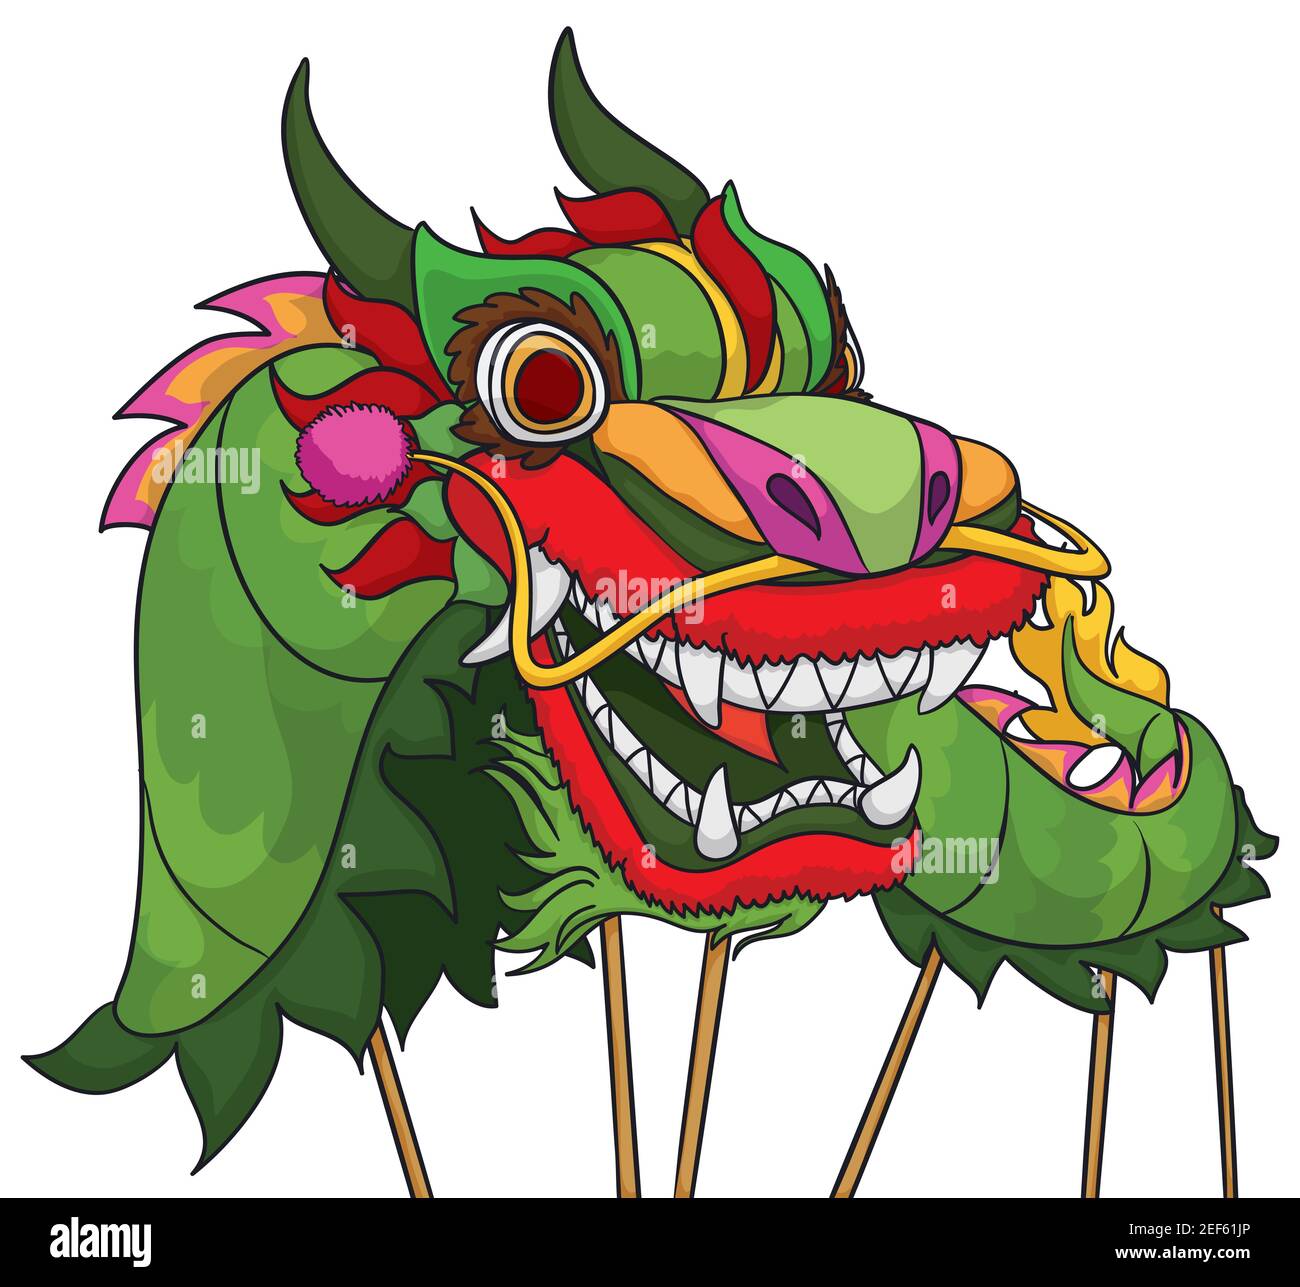 Chinese green costume with poles ready to perform the traditional dragon dance. Stock Vector